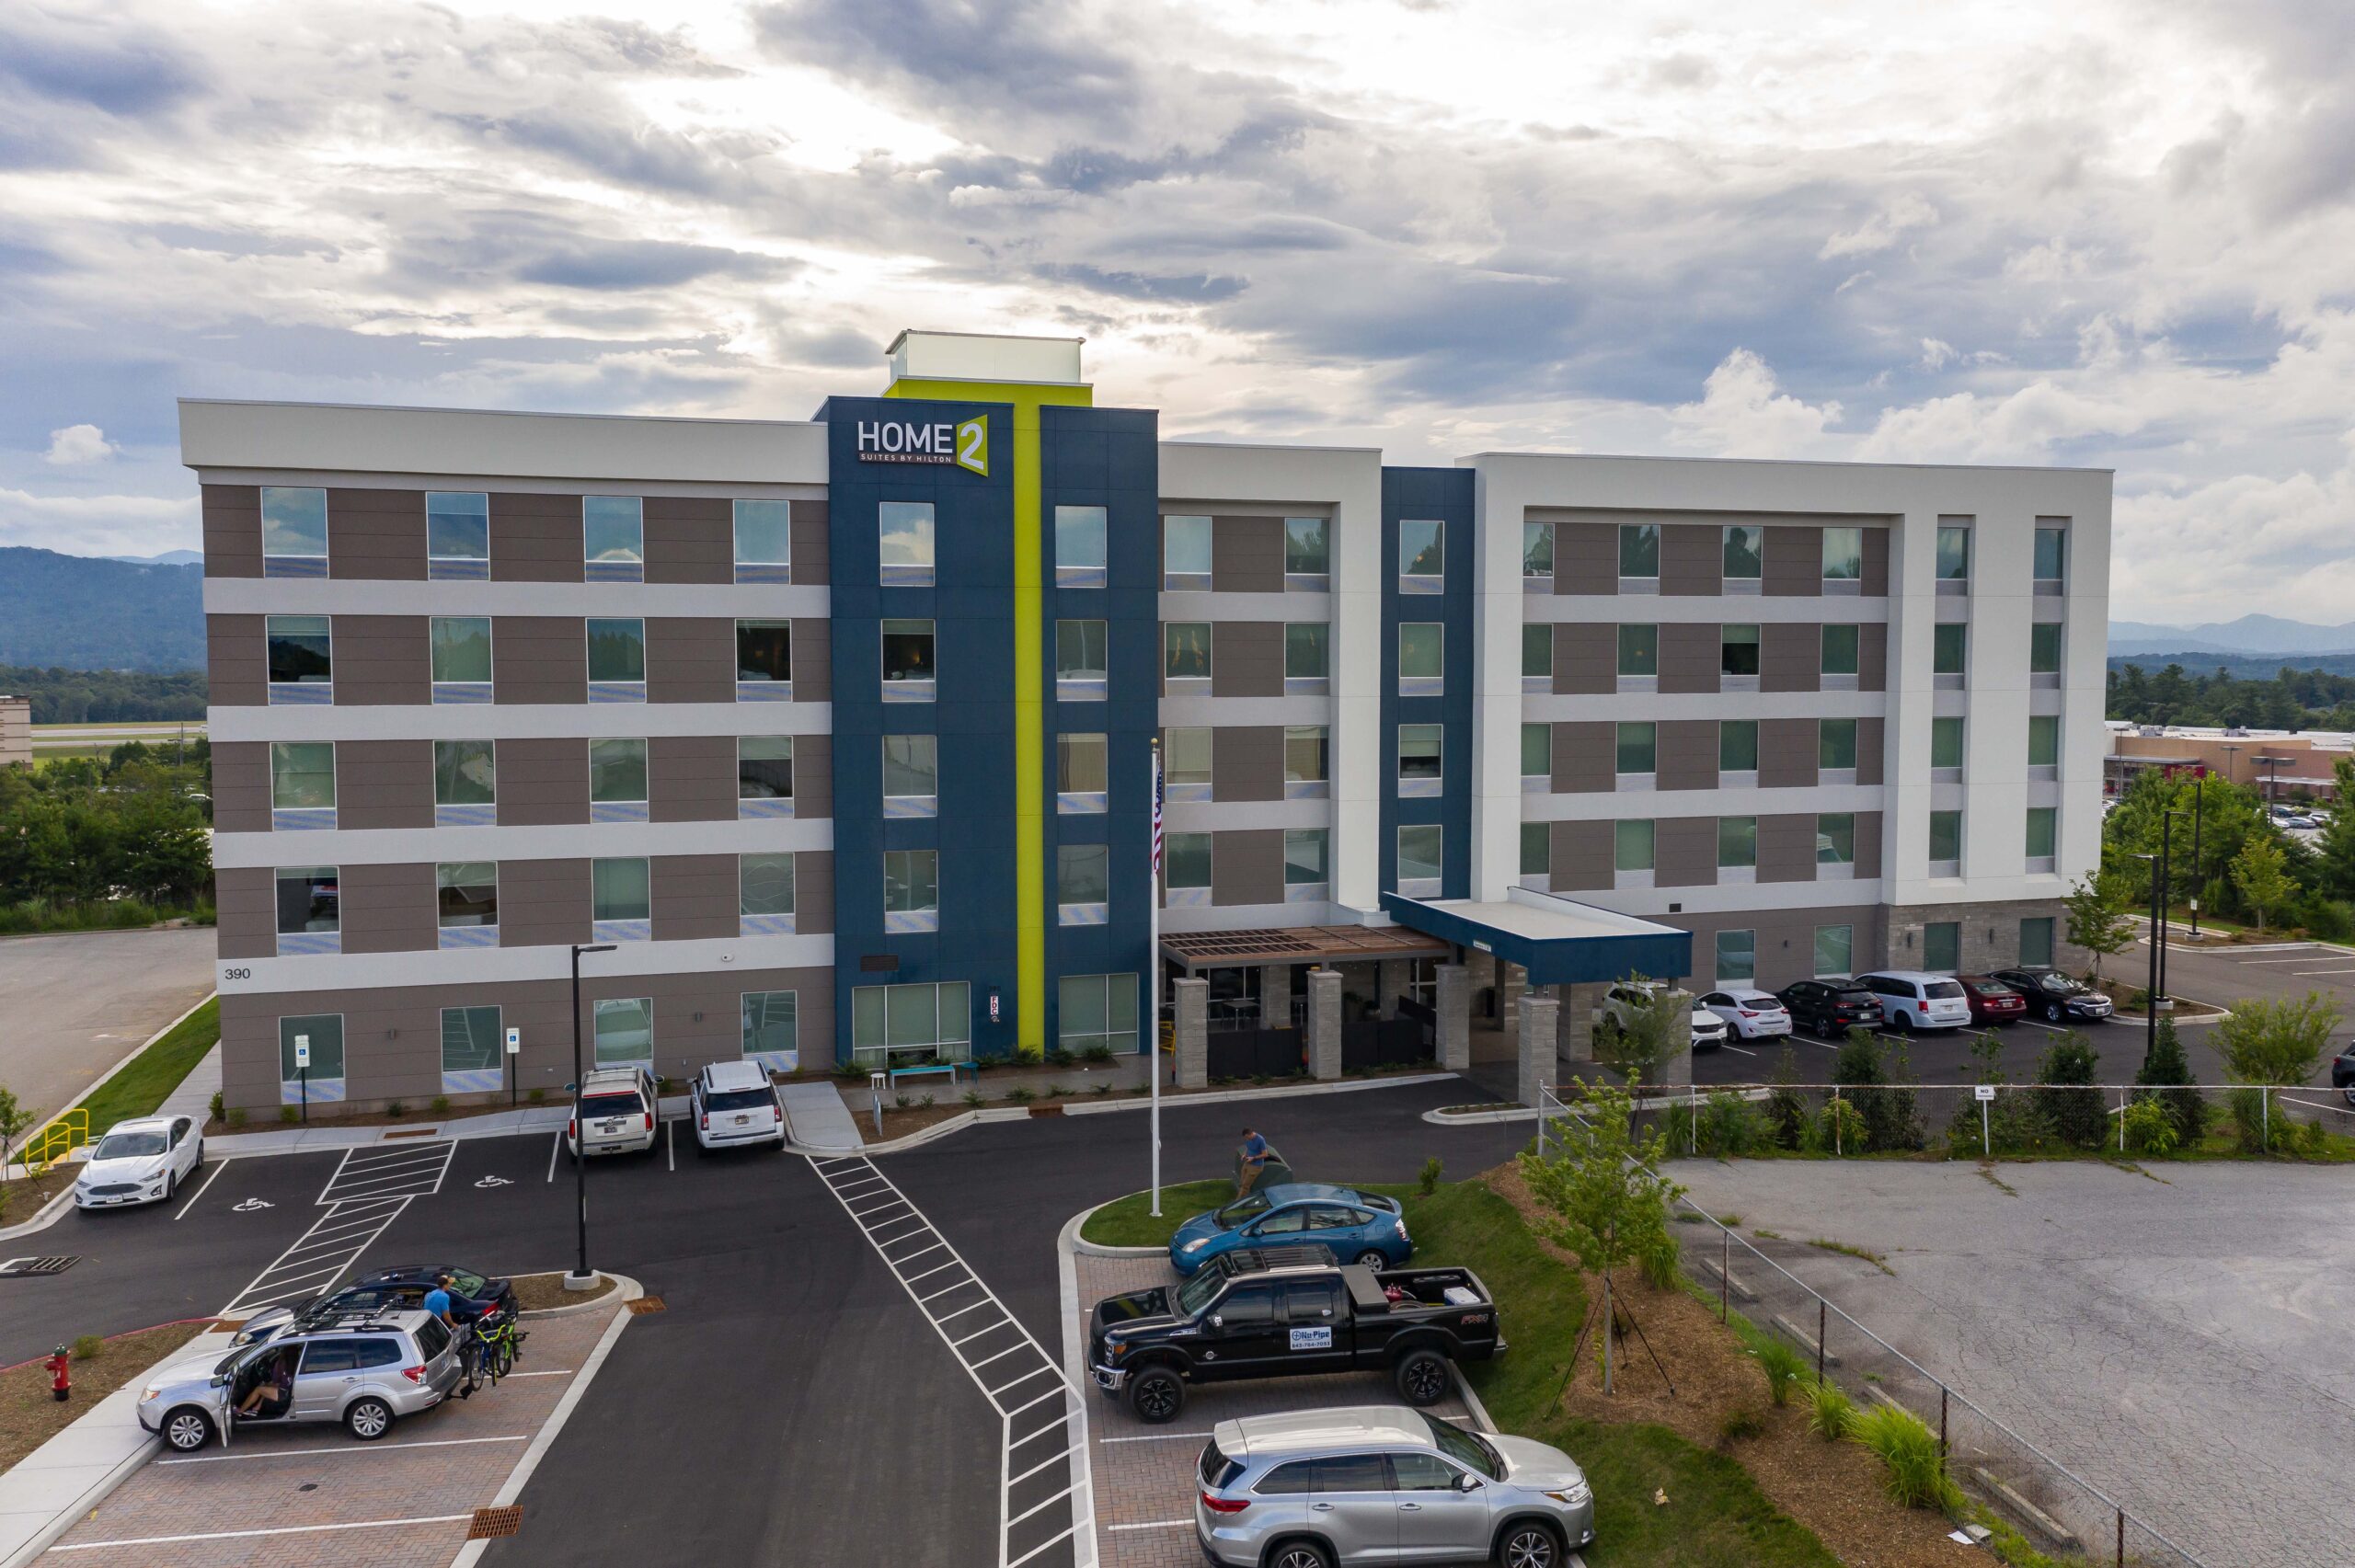 Exterior of Home2Suites building.